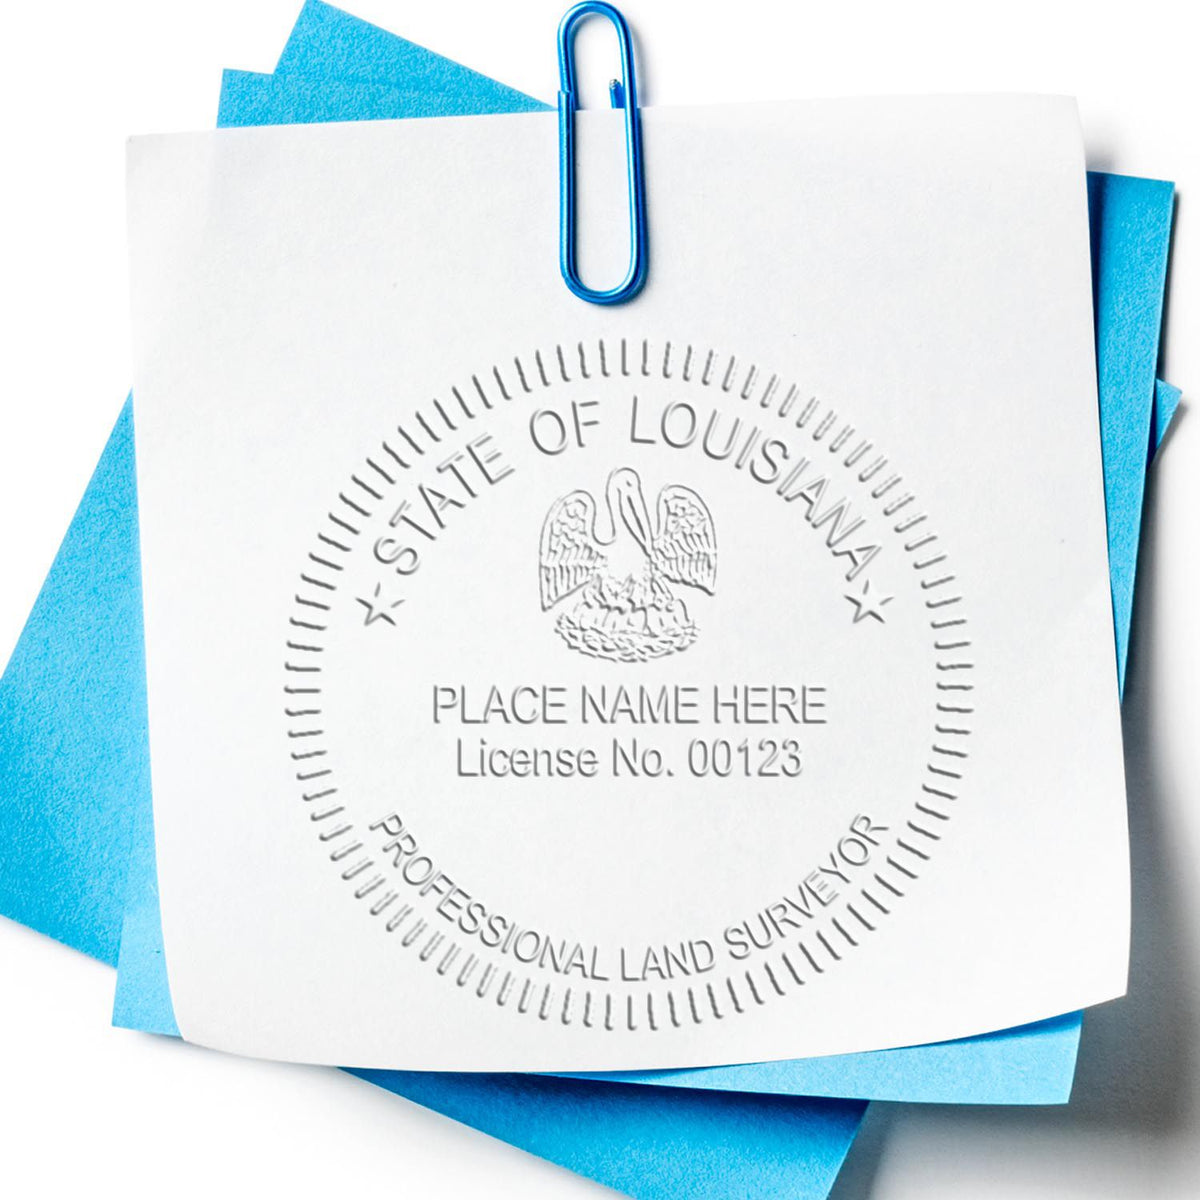 A lifestyle photo showing a stamped image of the Handheld Louisiana Land Surveyor Seal on a piece of paper